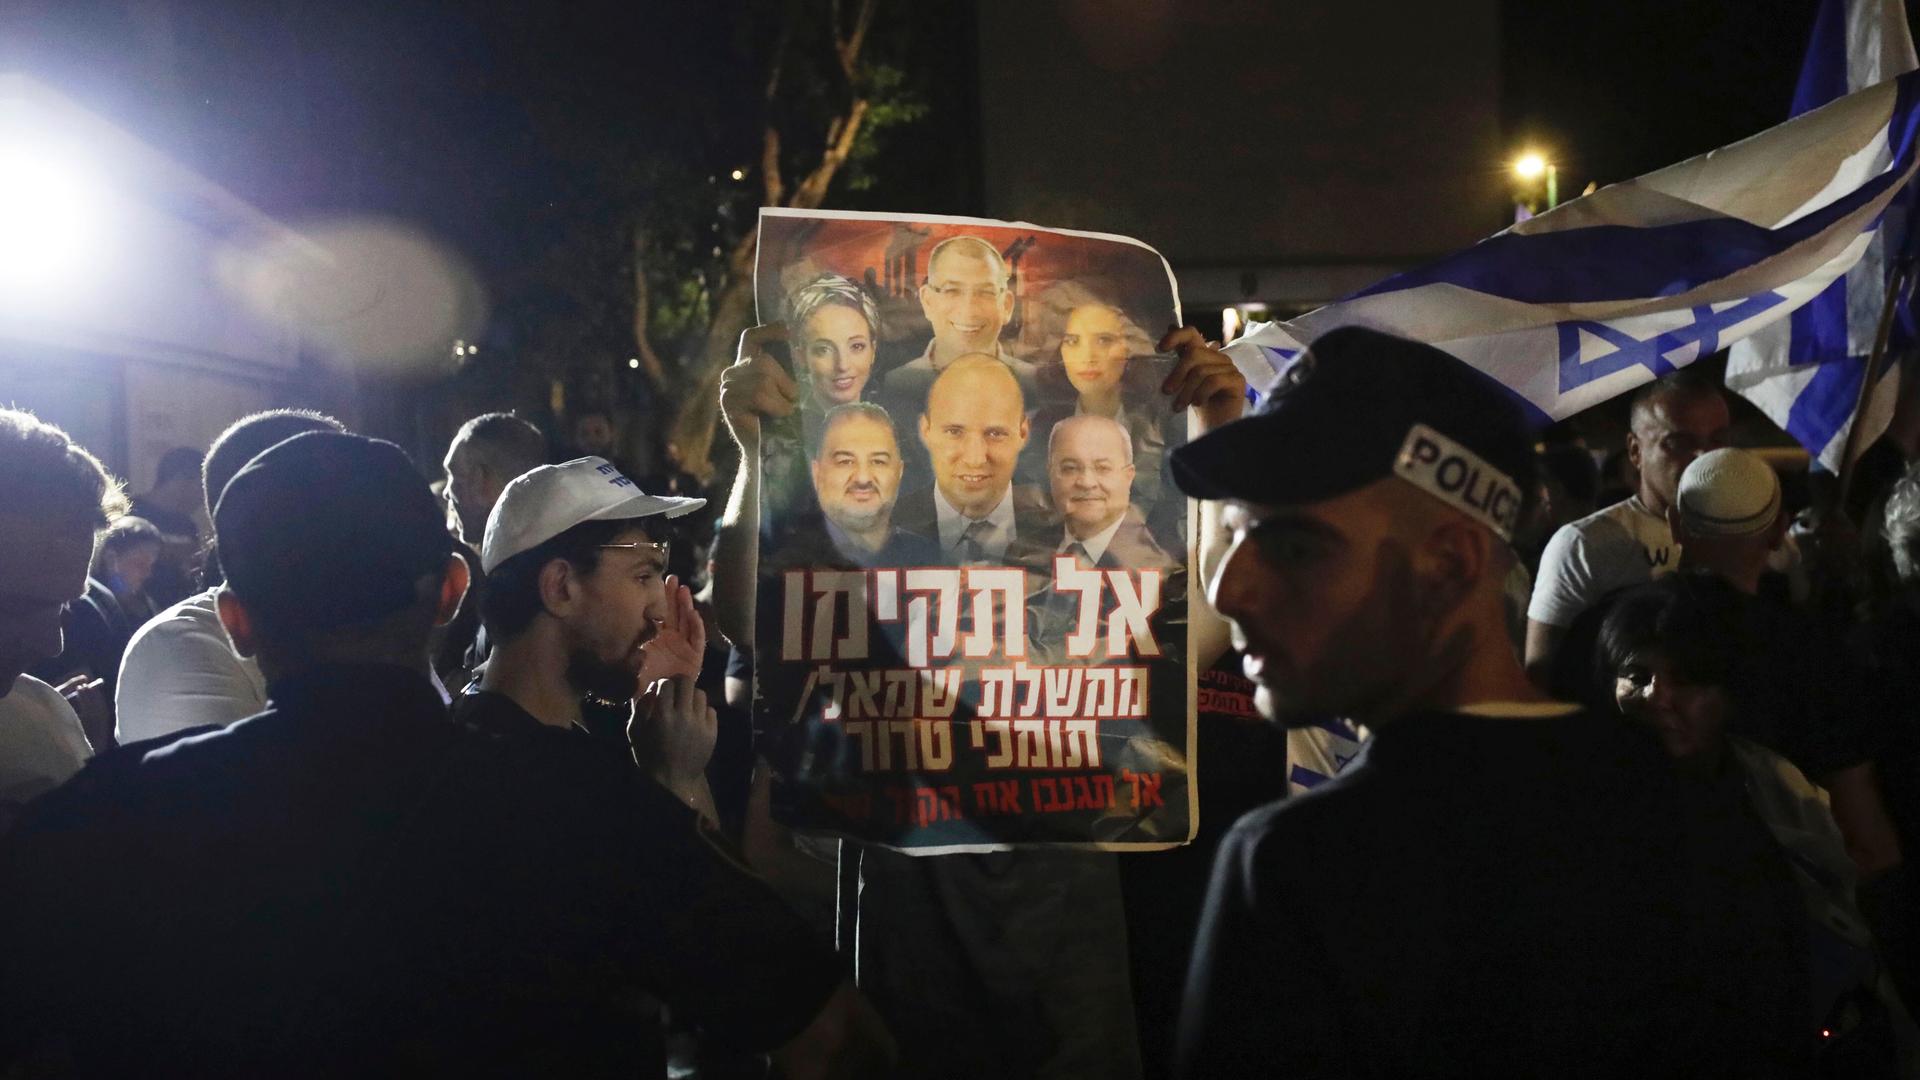 Israeli police officers stand guard as right-wing protesters chant slogans and hold signs.